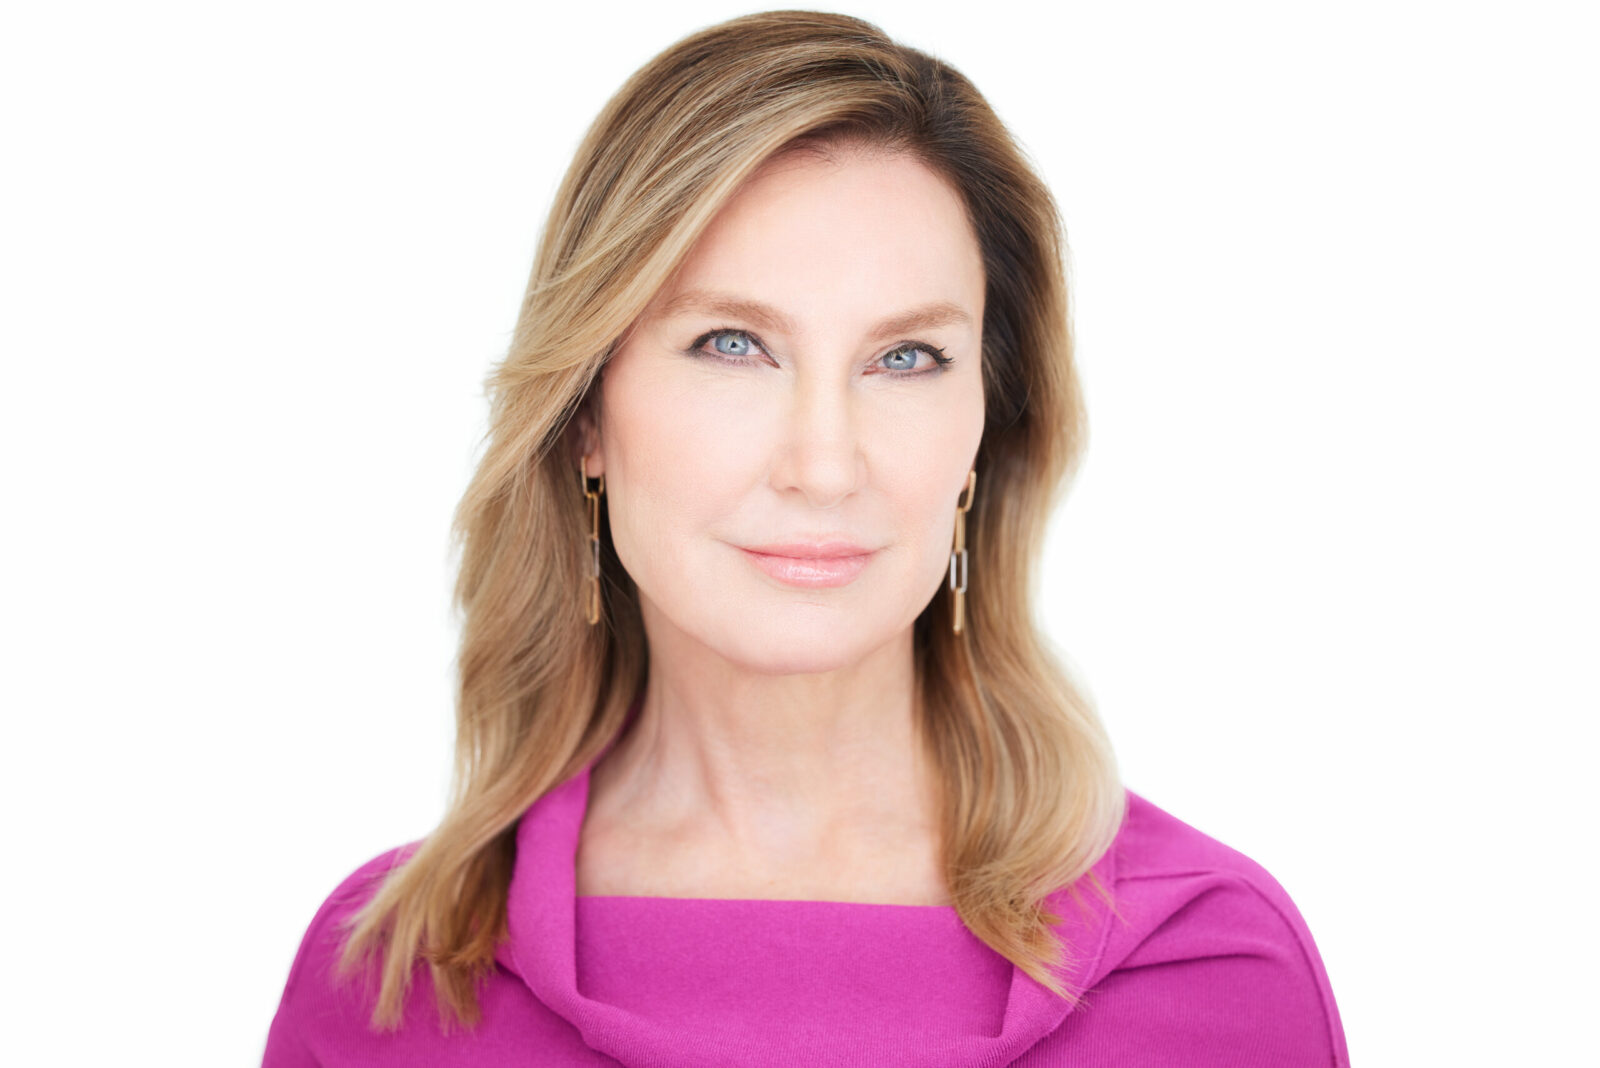 Cosmetic Dermatologist Dr. Sue Ellen Cox, founder and medical director of Aesthetic Solutions in Chapel Hill, NC.